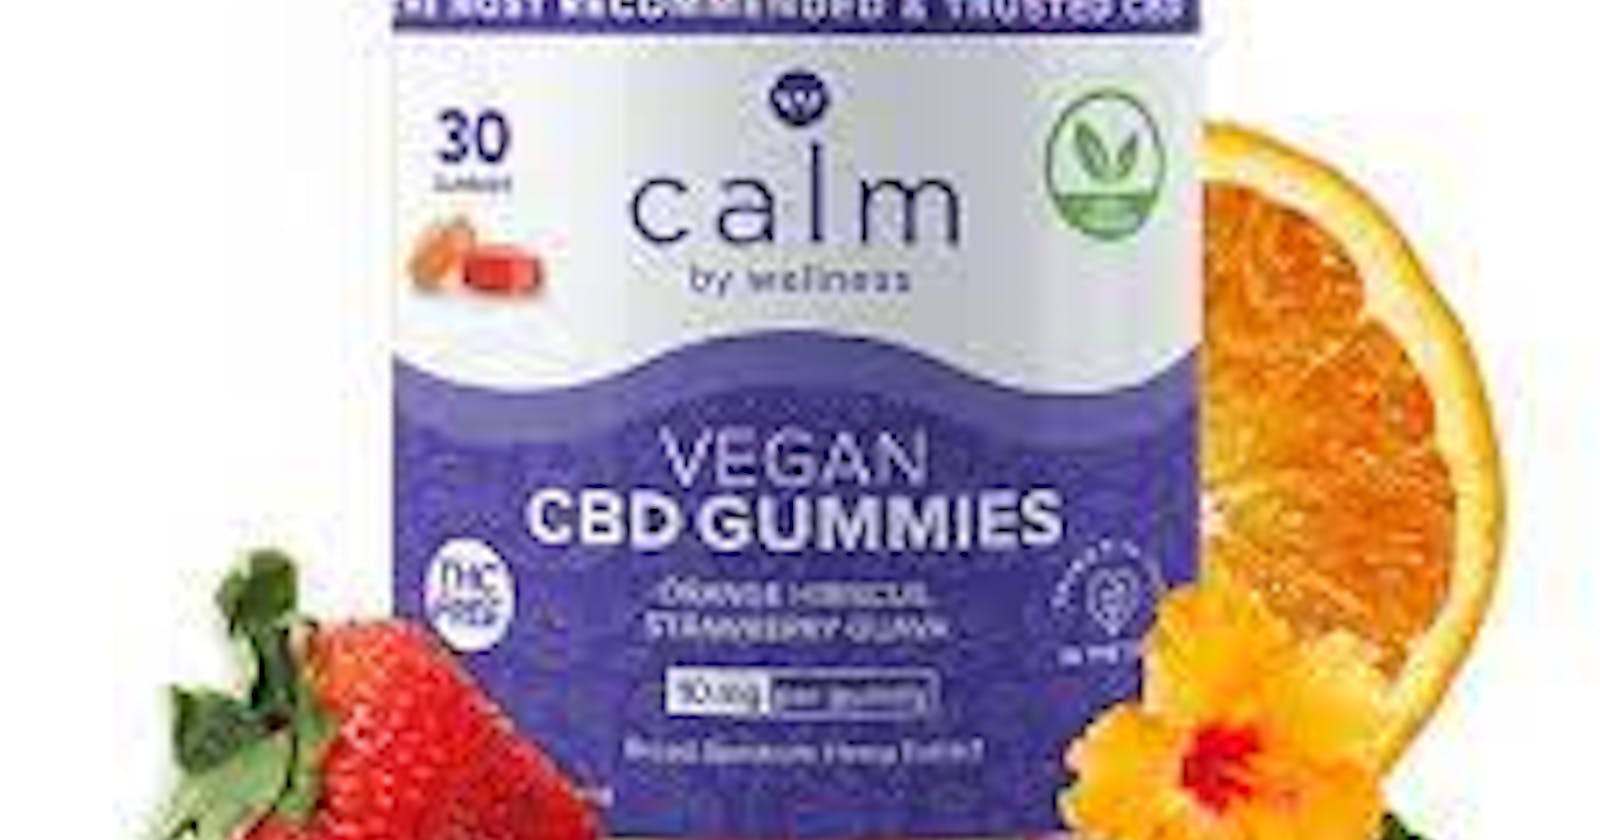 Calmwell CBD Gummies Gives You More Energy Or Just A Hoax!